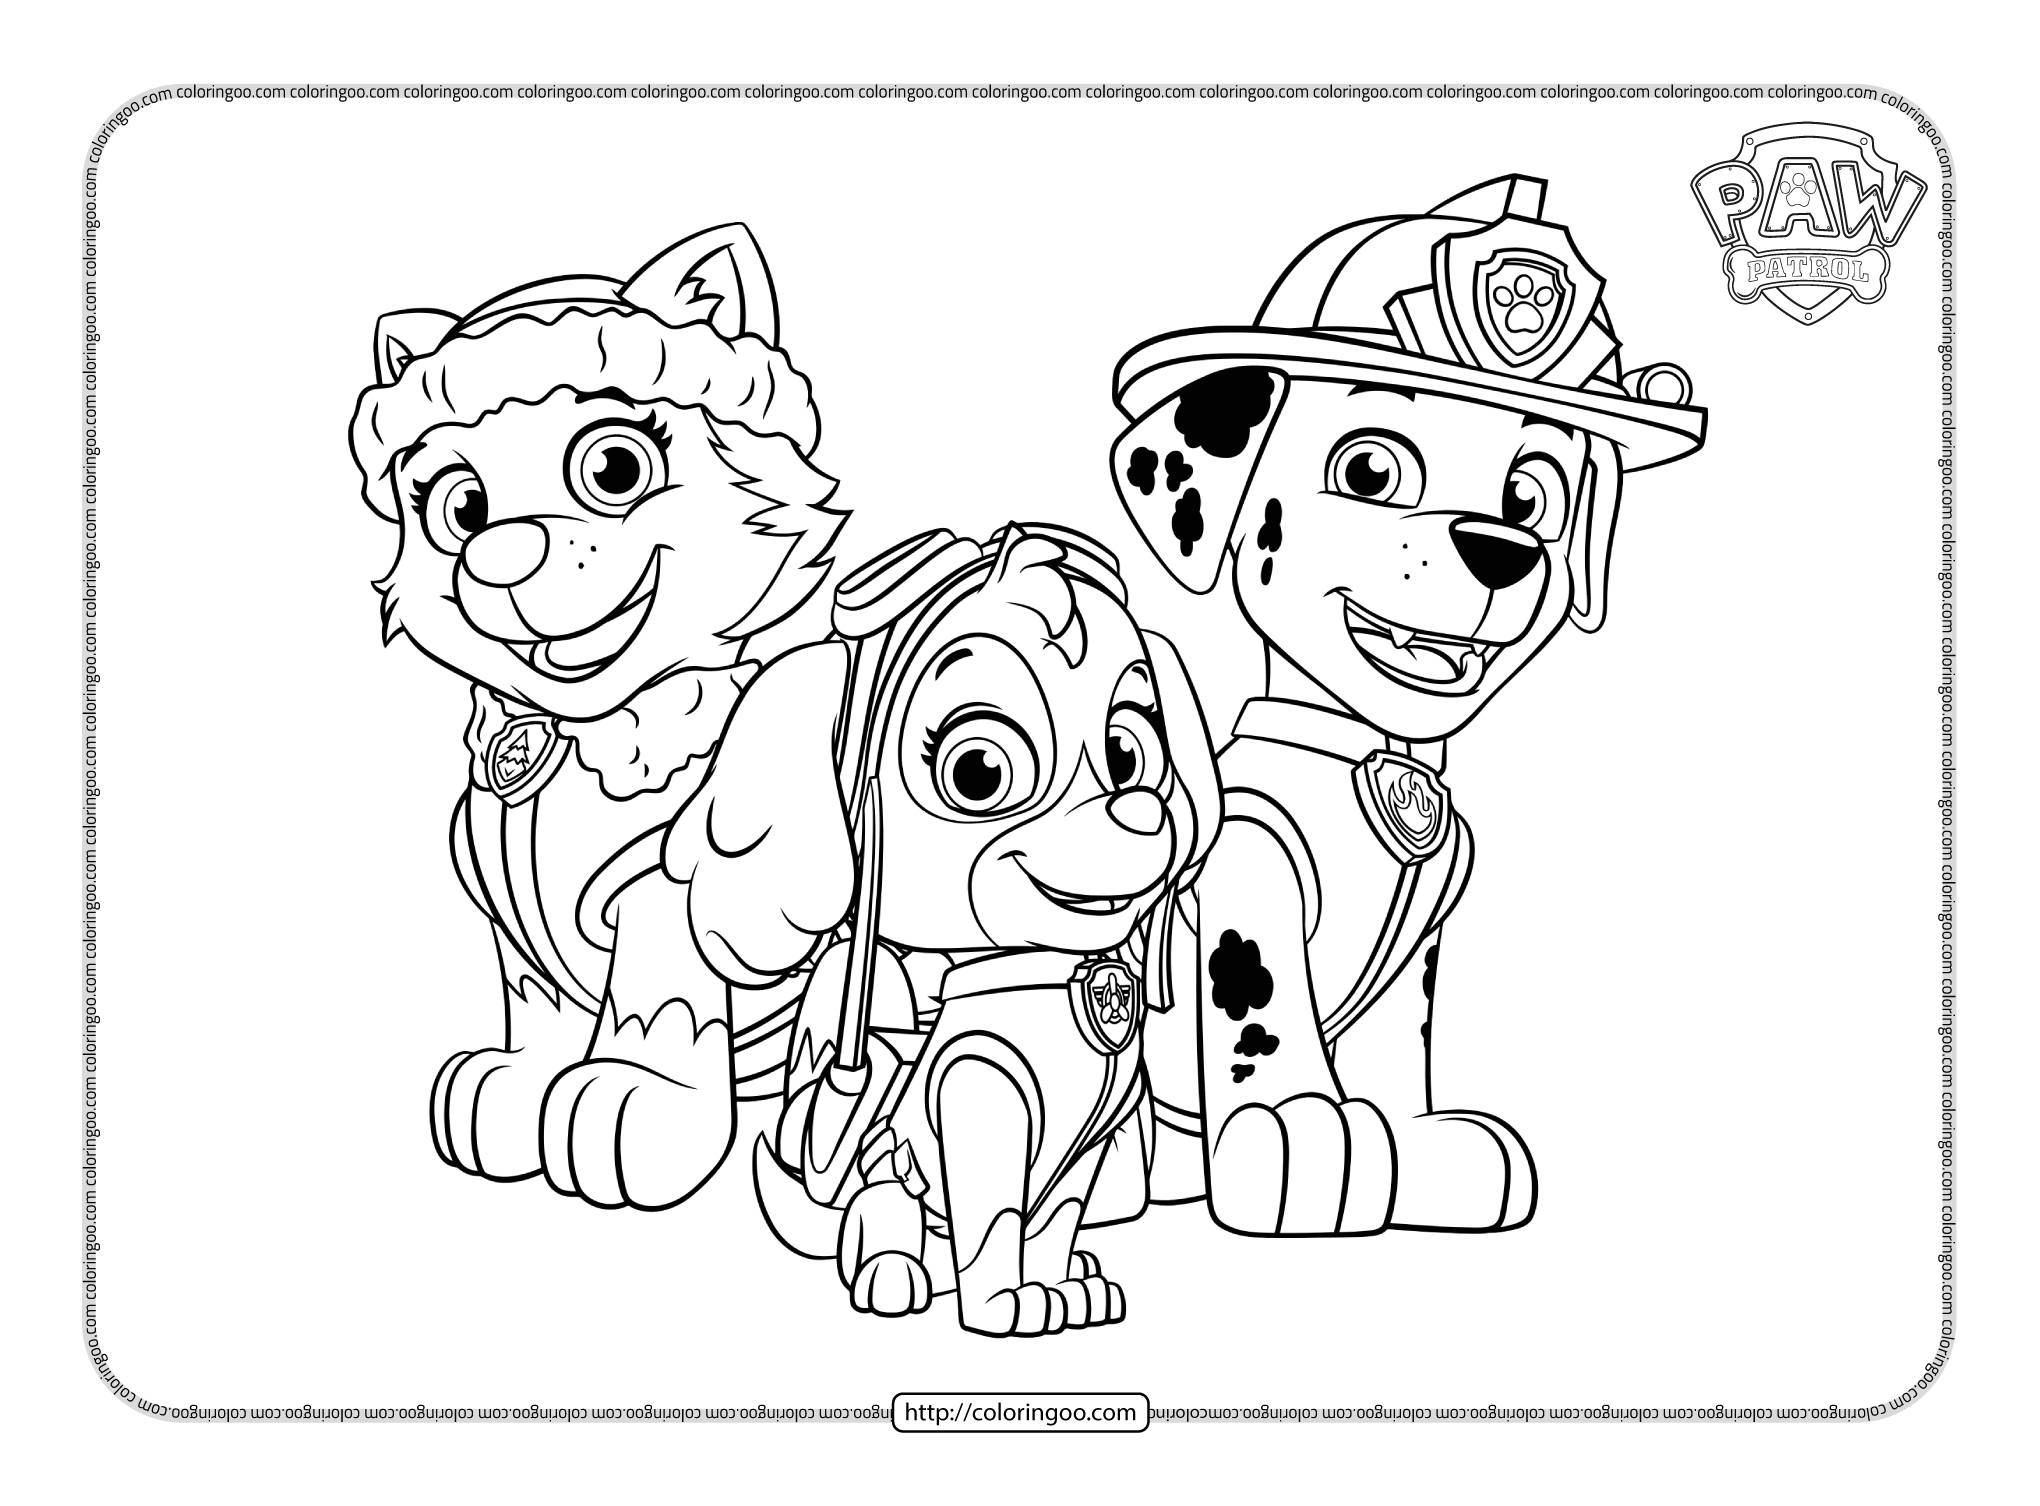 everest skye and marshall coloring pages